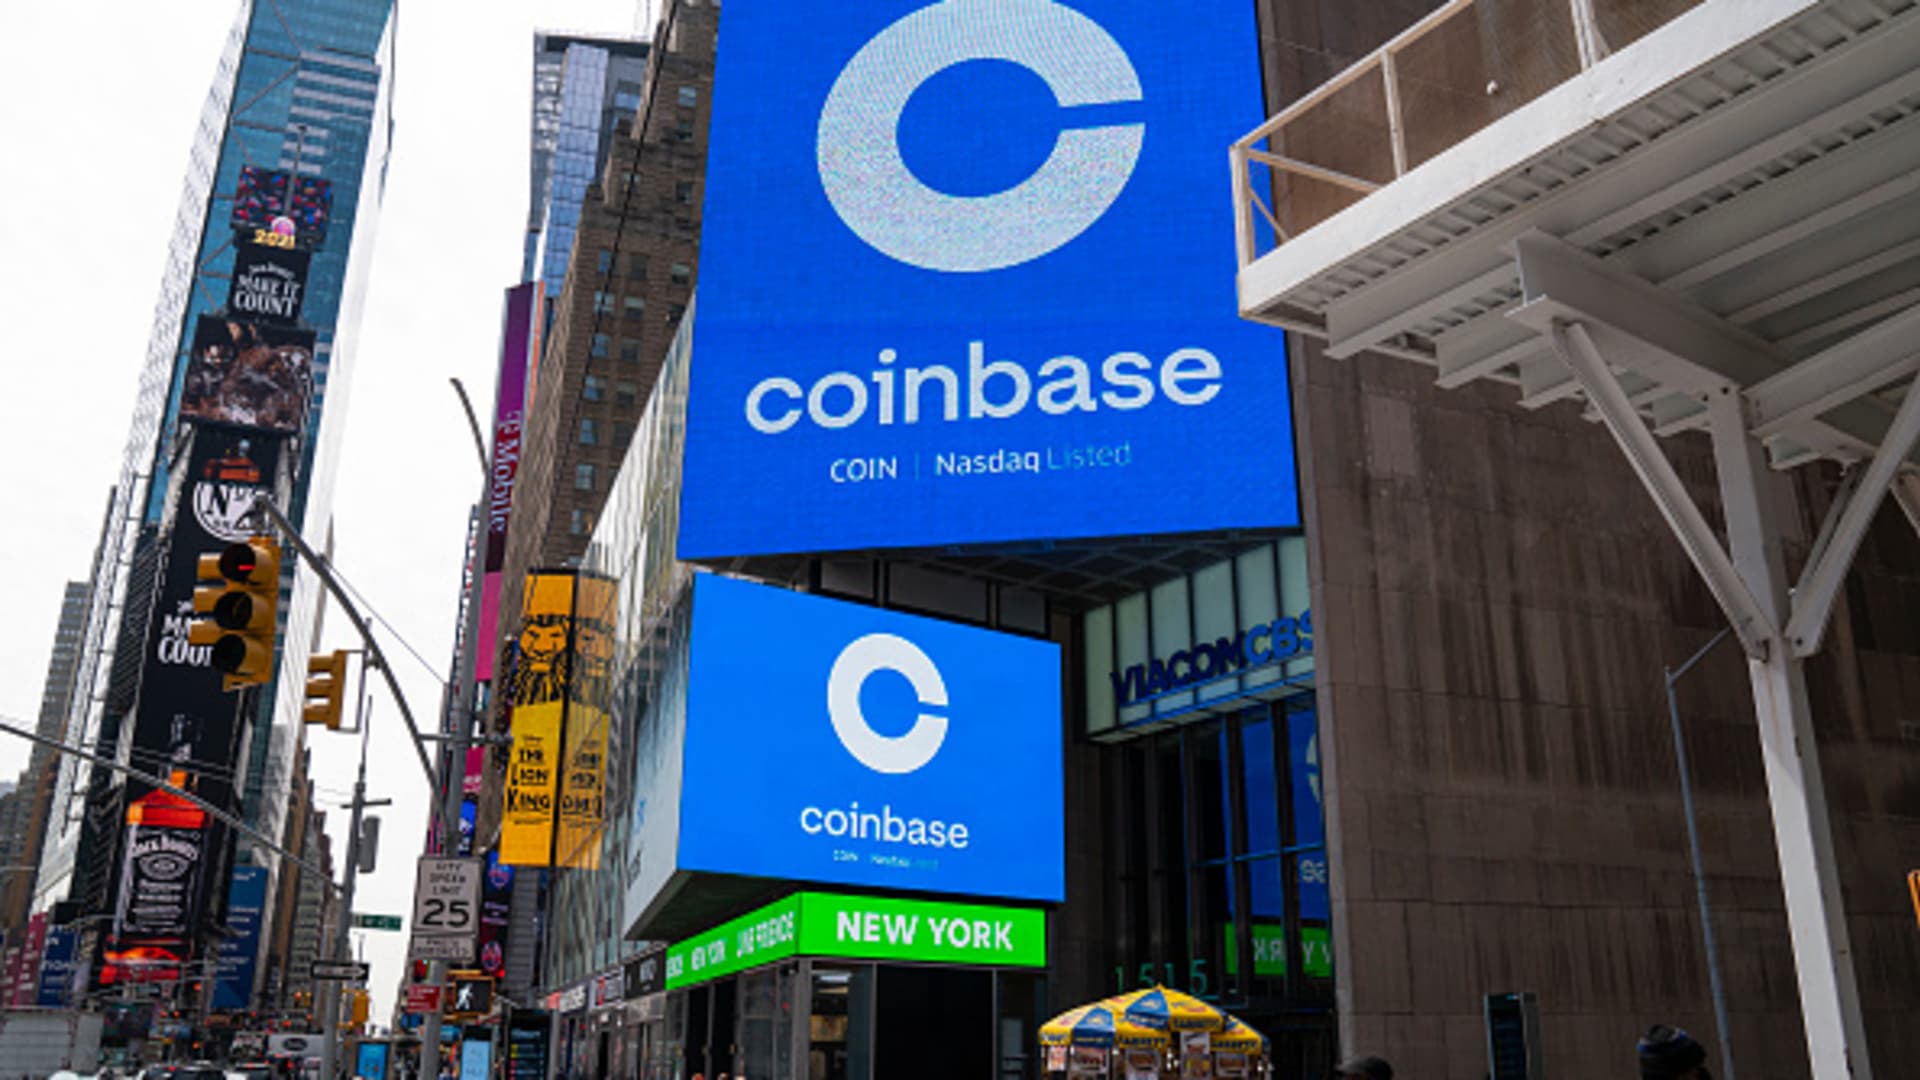 Monitors display Coinbase signage during the company's initial public offering (IPO) at the Nasdaq market site April 14, 2021 in New York City.